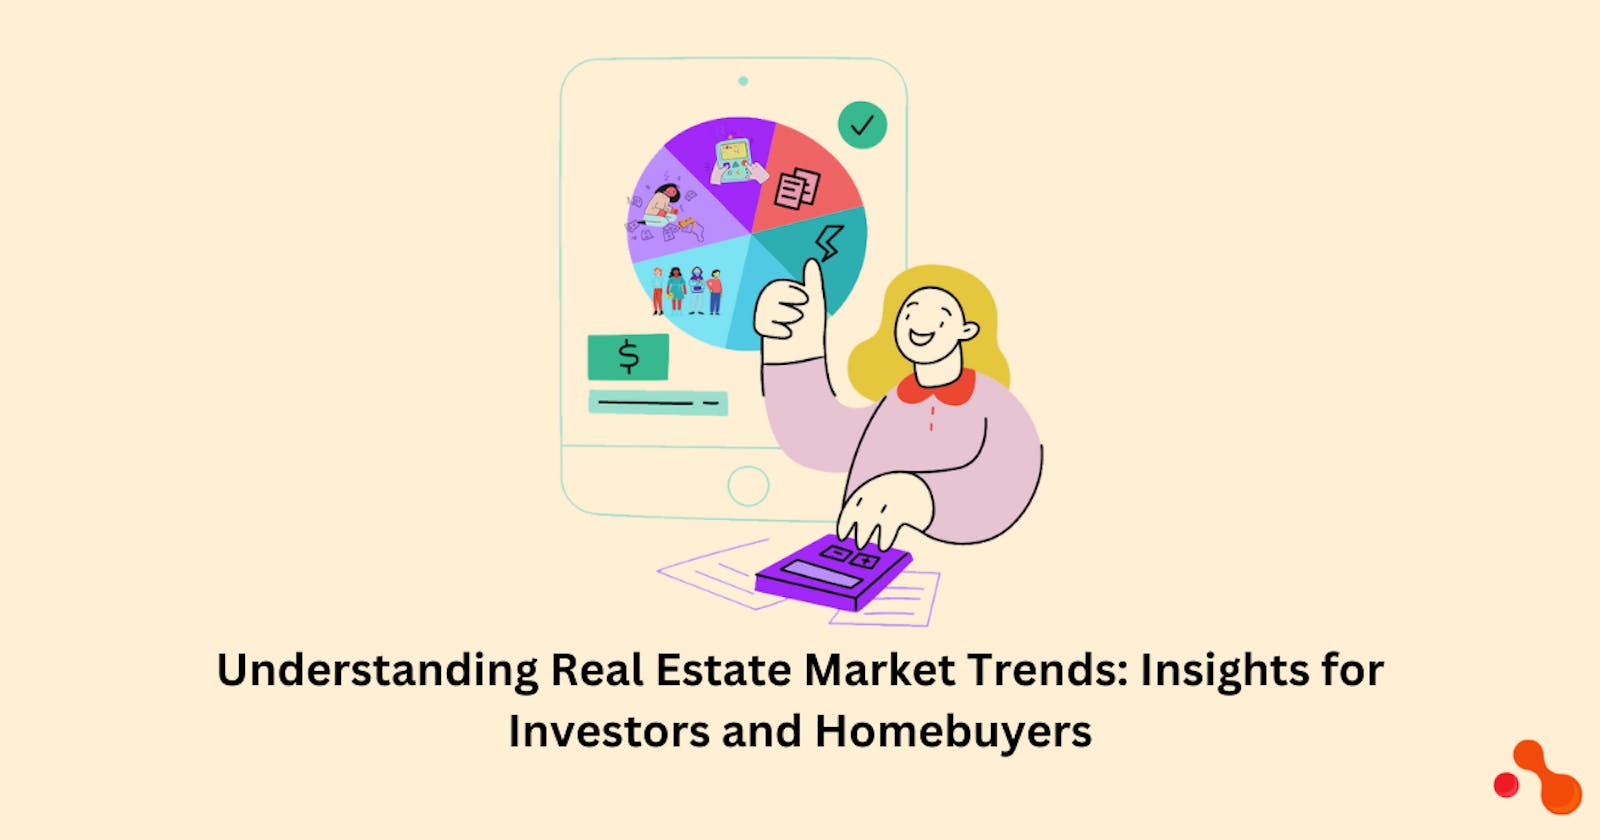 Understanding Real Estate Market Trends: Insights for Investors and Homebuyers